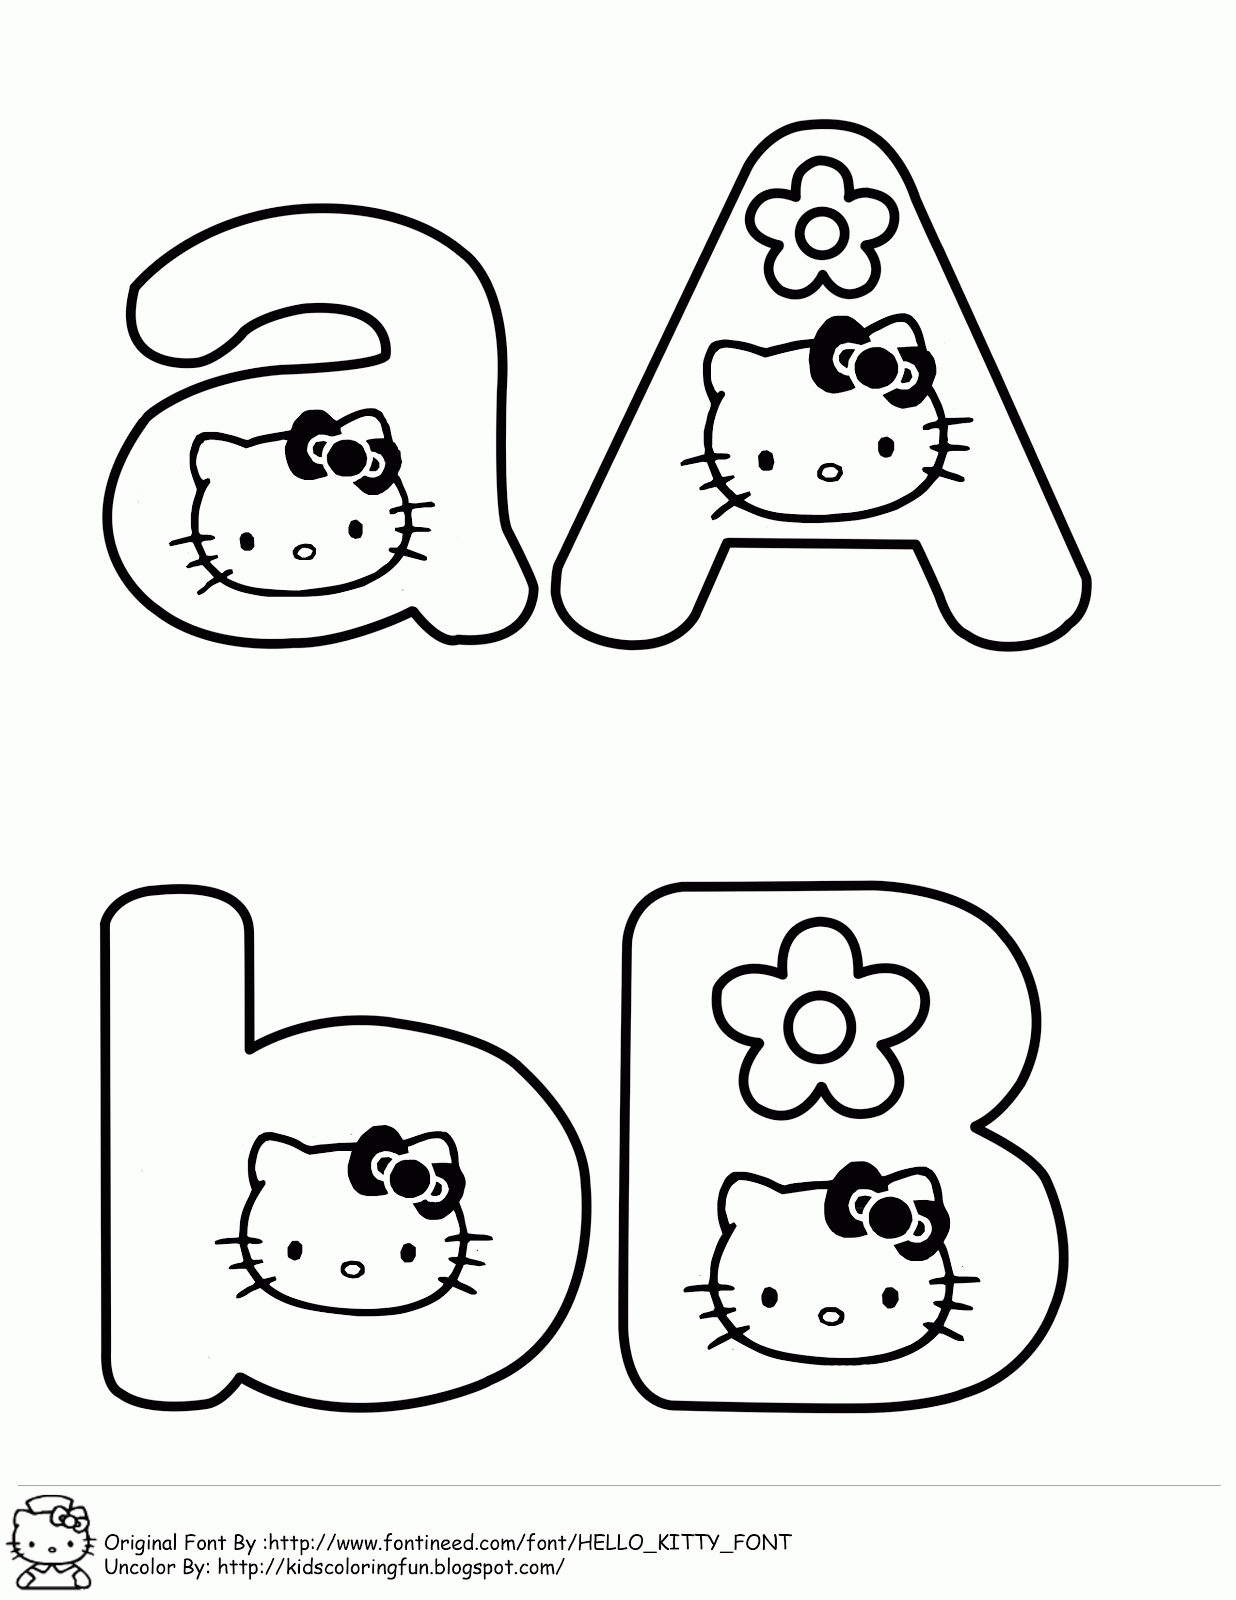 Free Hello Kitty Font, Download Free Clip Art, Free Clip Art On - Free Printable Hello Kitty Alphabet Letters